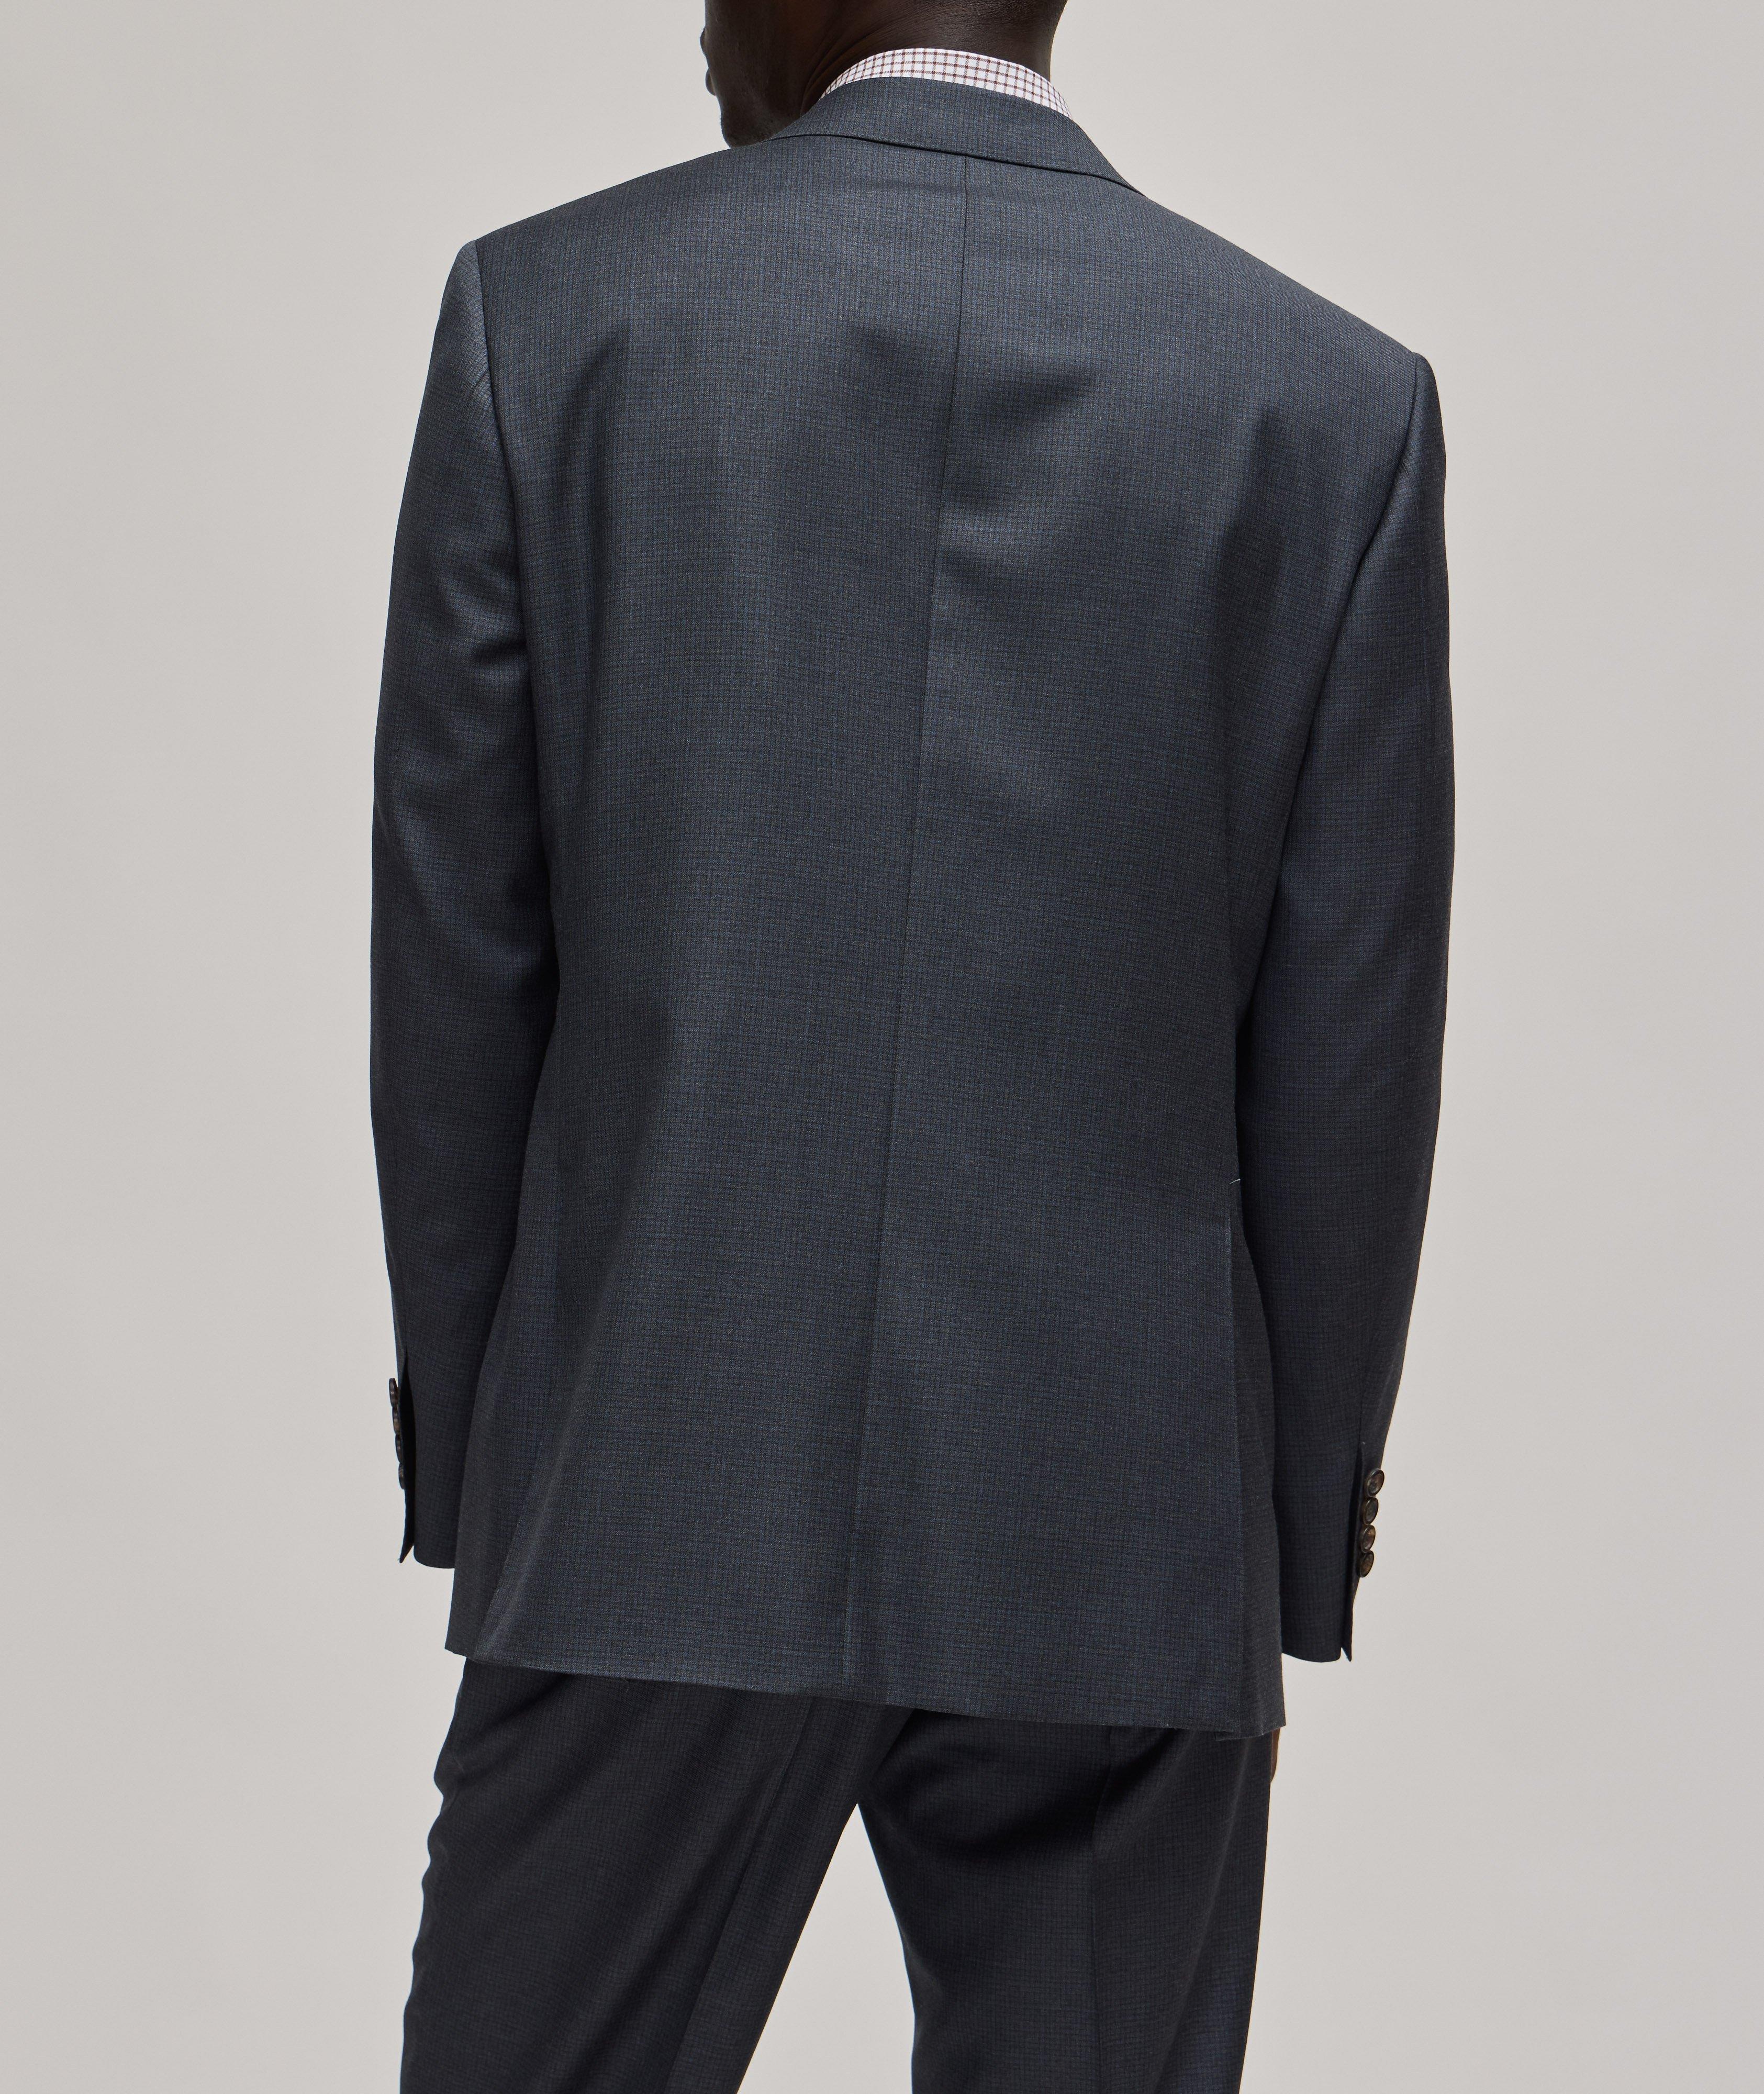 Micro Check Wool Suit image 2